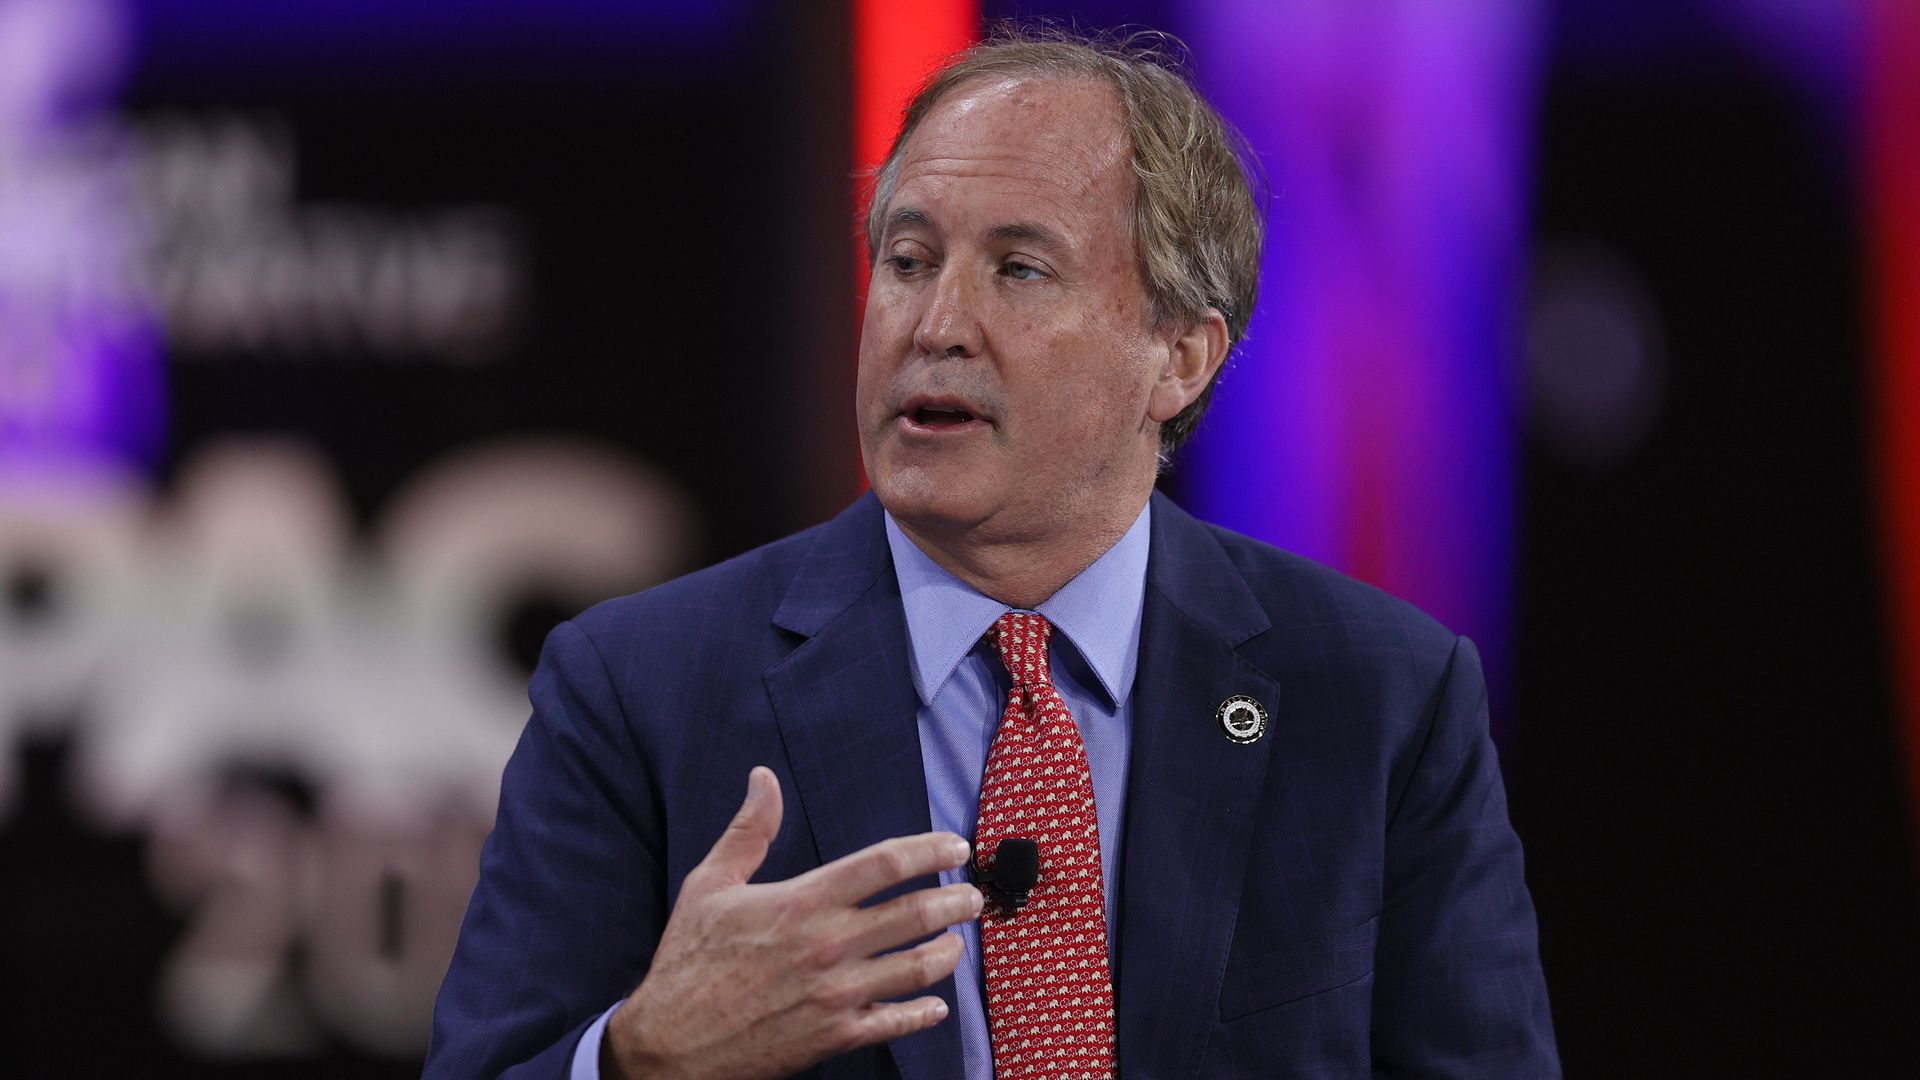 Ken Paxton, Texas Attorney General, speaks at the Conservative Political Action Conference held in the Hyatt Regency on February 27, 2021 in Orlando, Florida. 